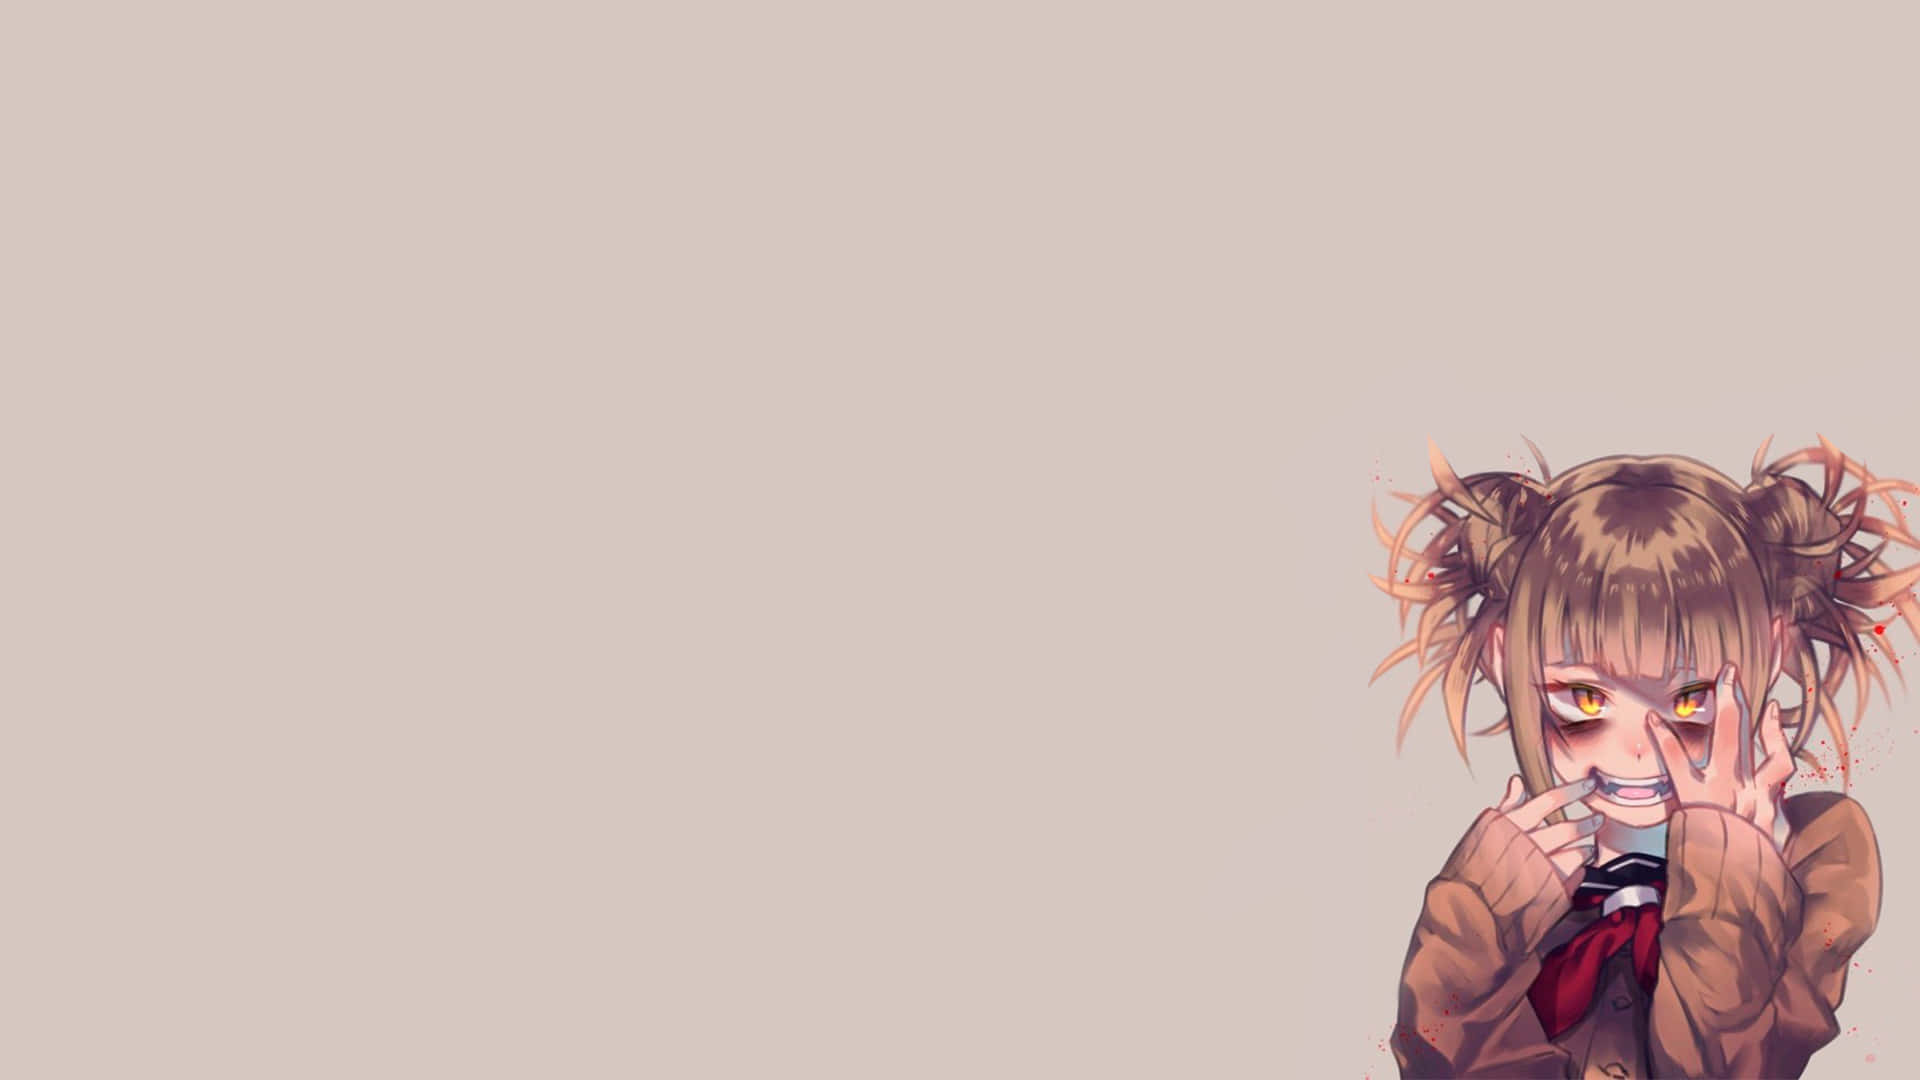 An Aesthetic Look at Himiko Toga, My Hero Academia's Troublemaker Wallpaper